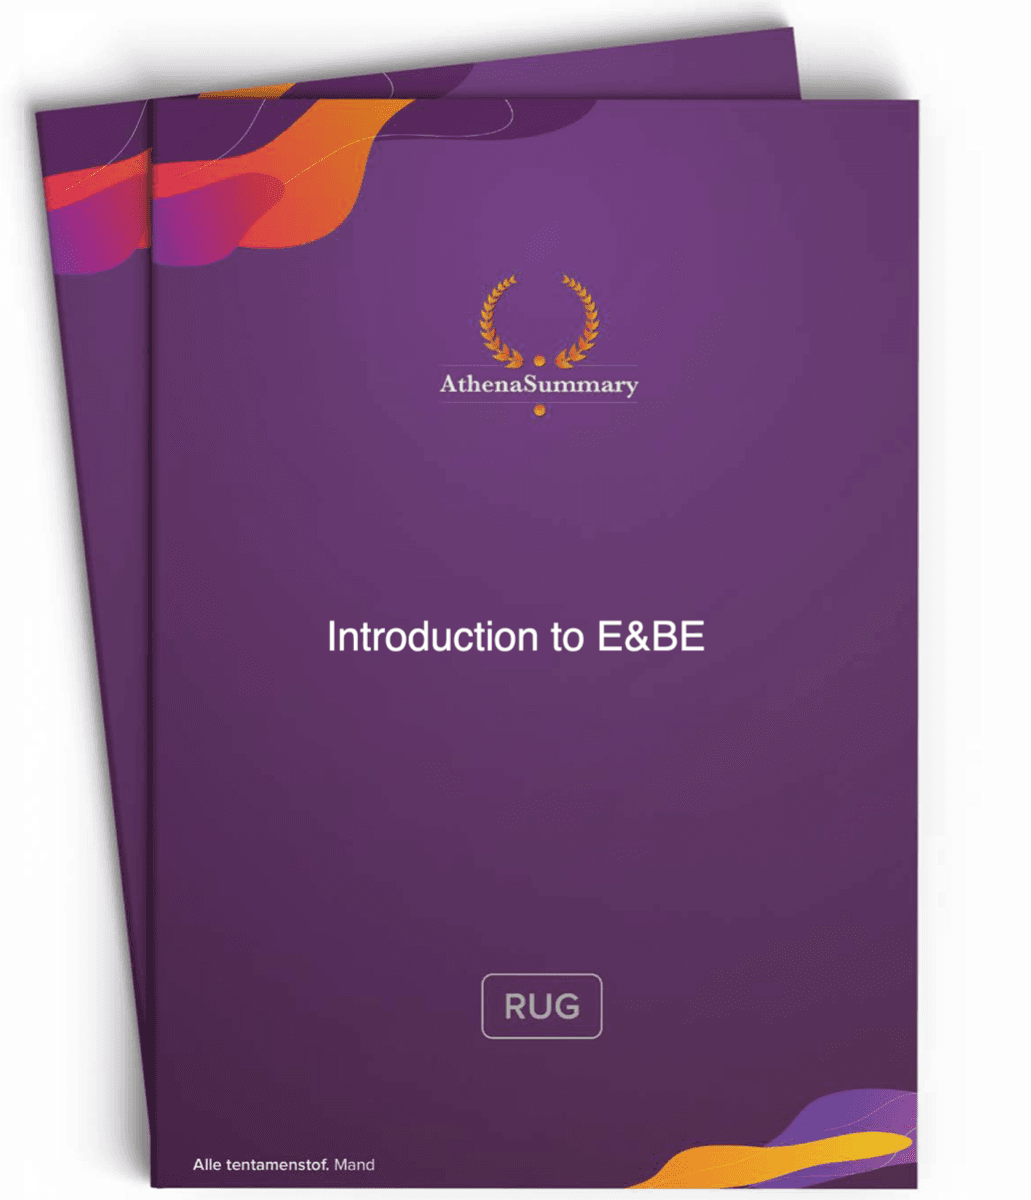 Introduction to E&BE